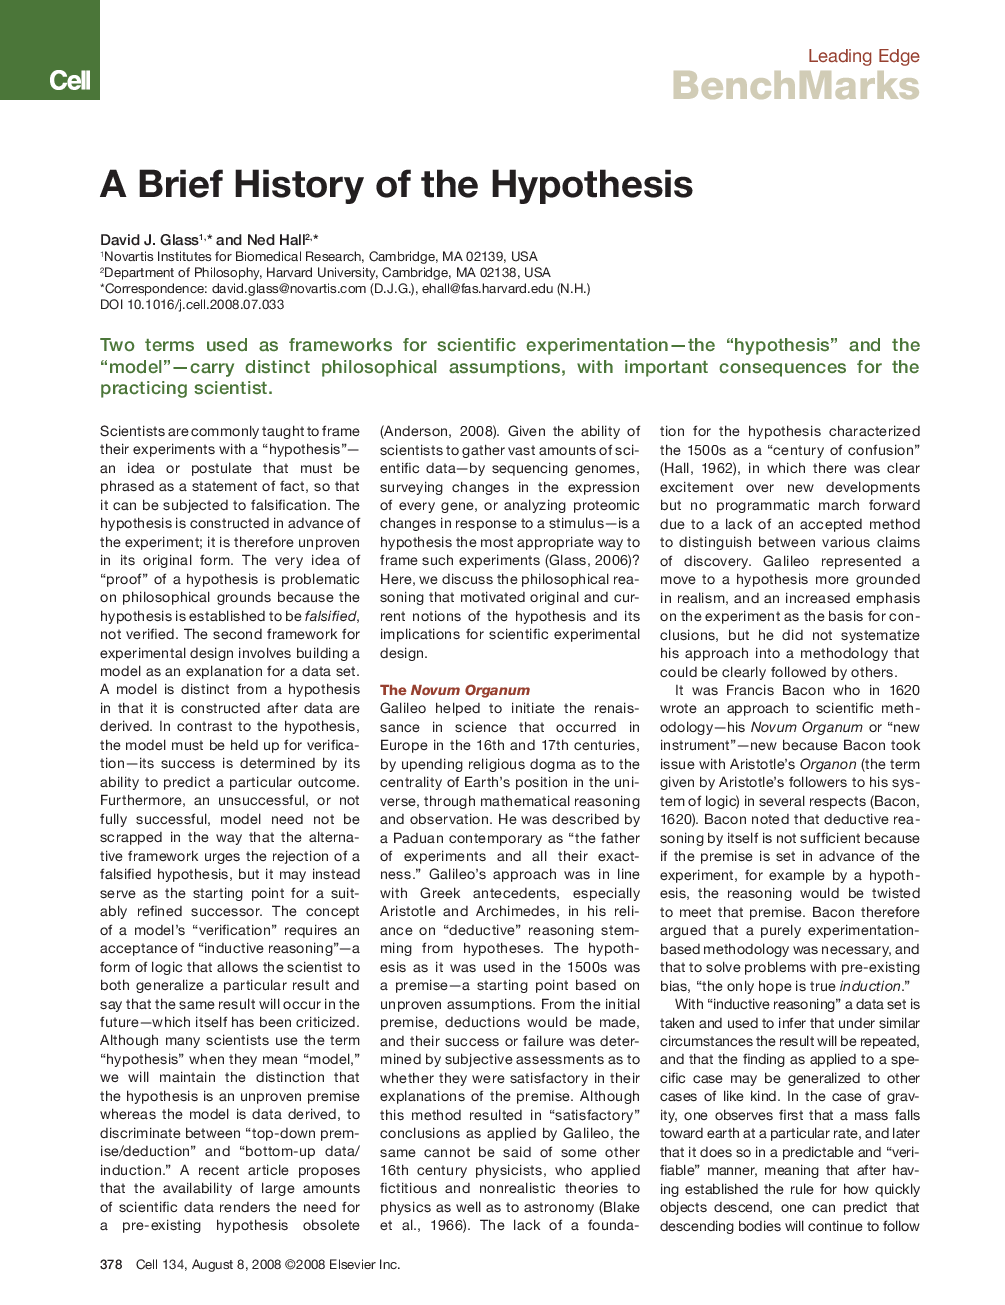 A Brief History of the Hypothesis